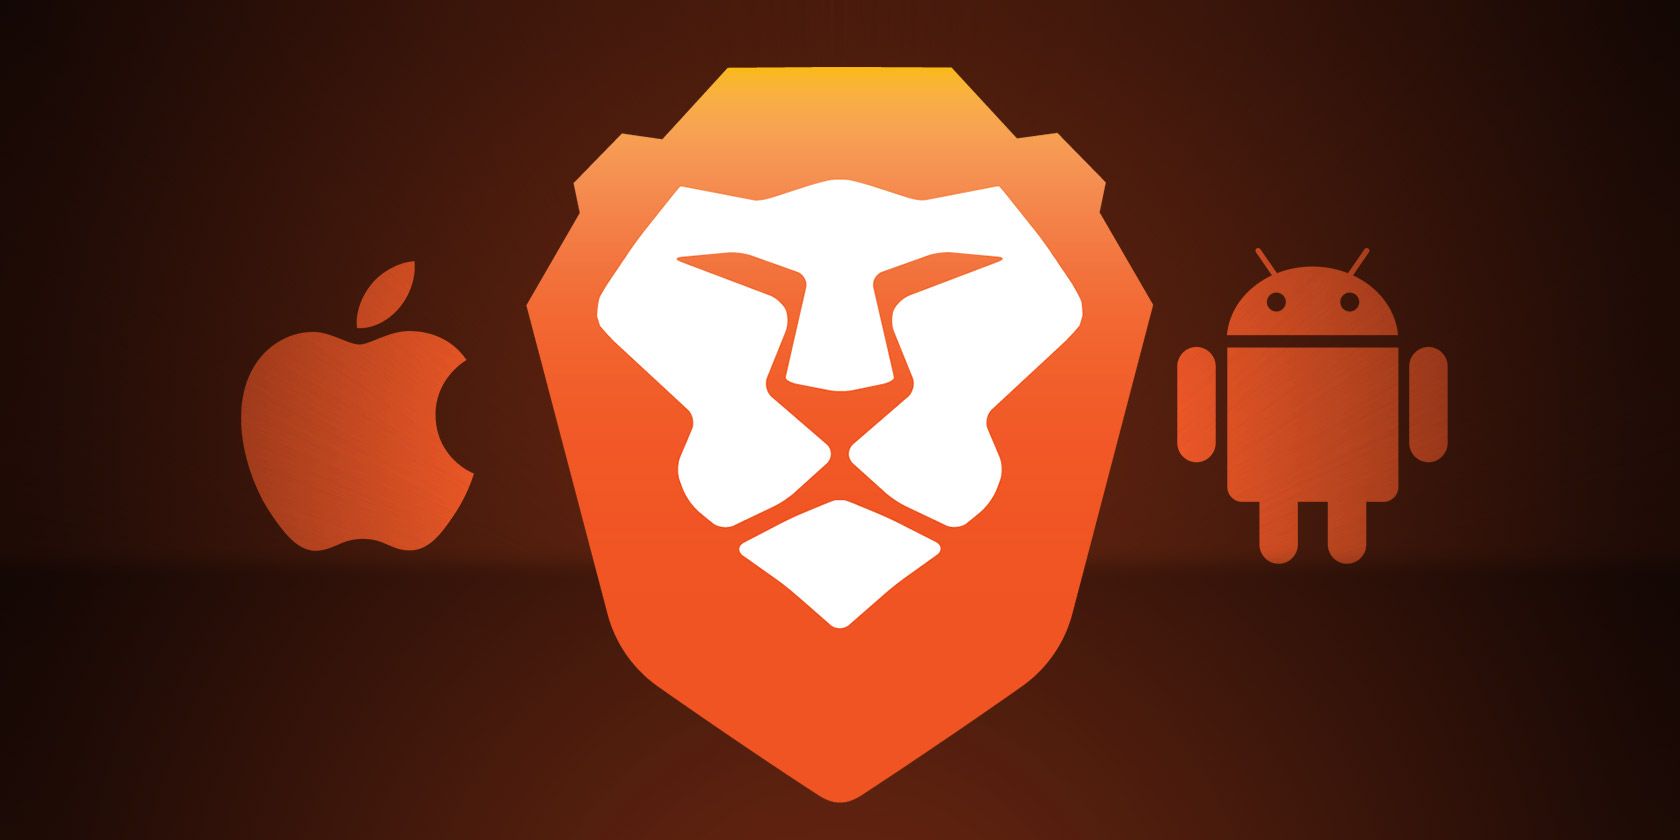 brave android apk